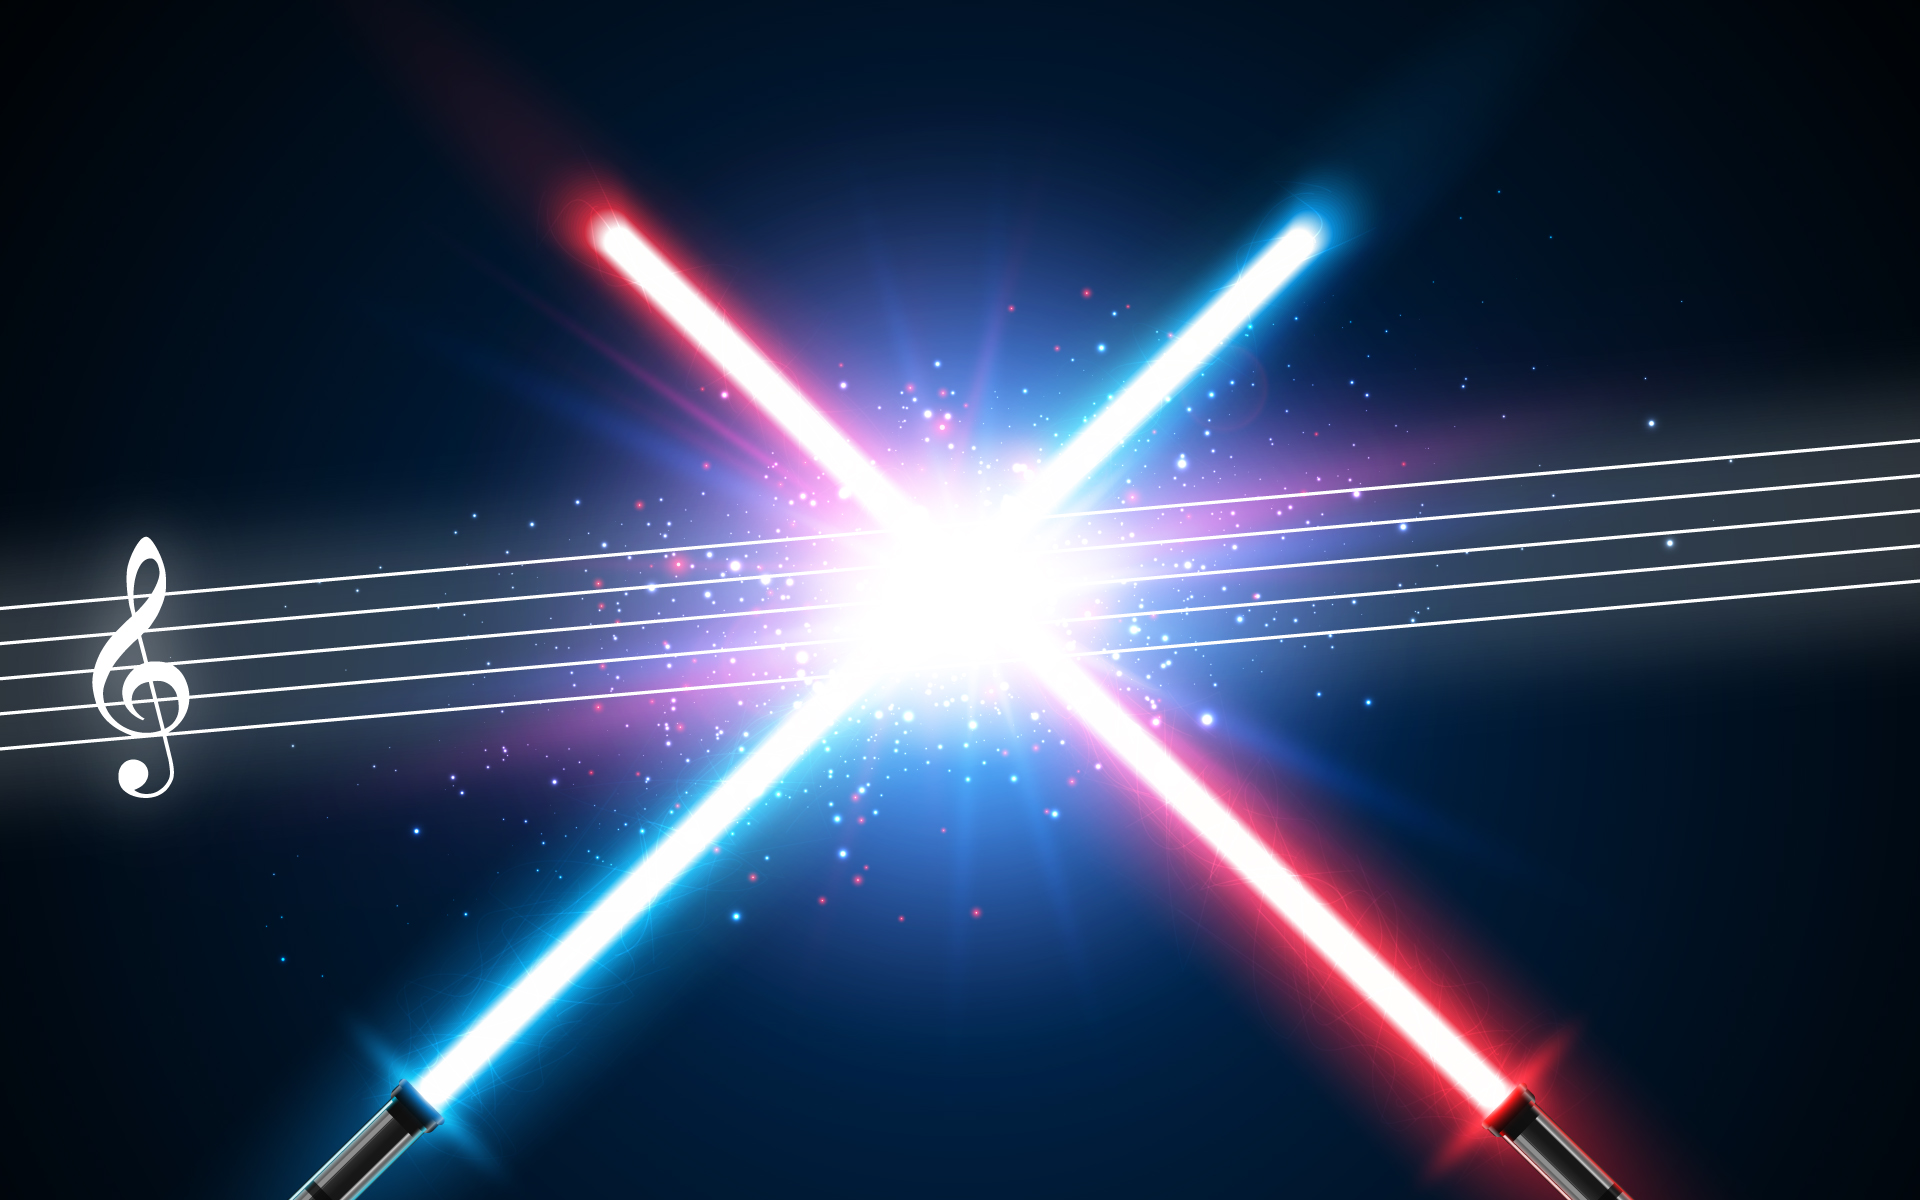 A white music staff over a black background with two lightsabers making an X through it.